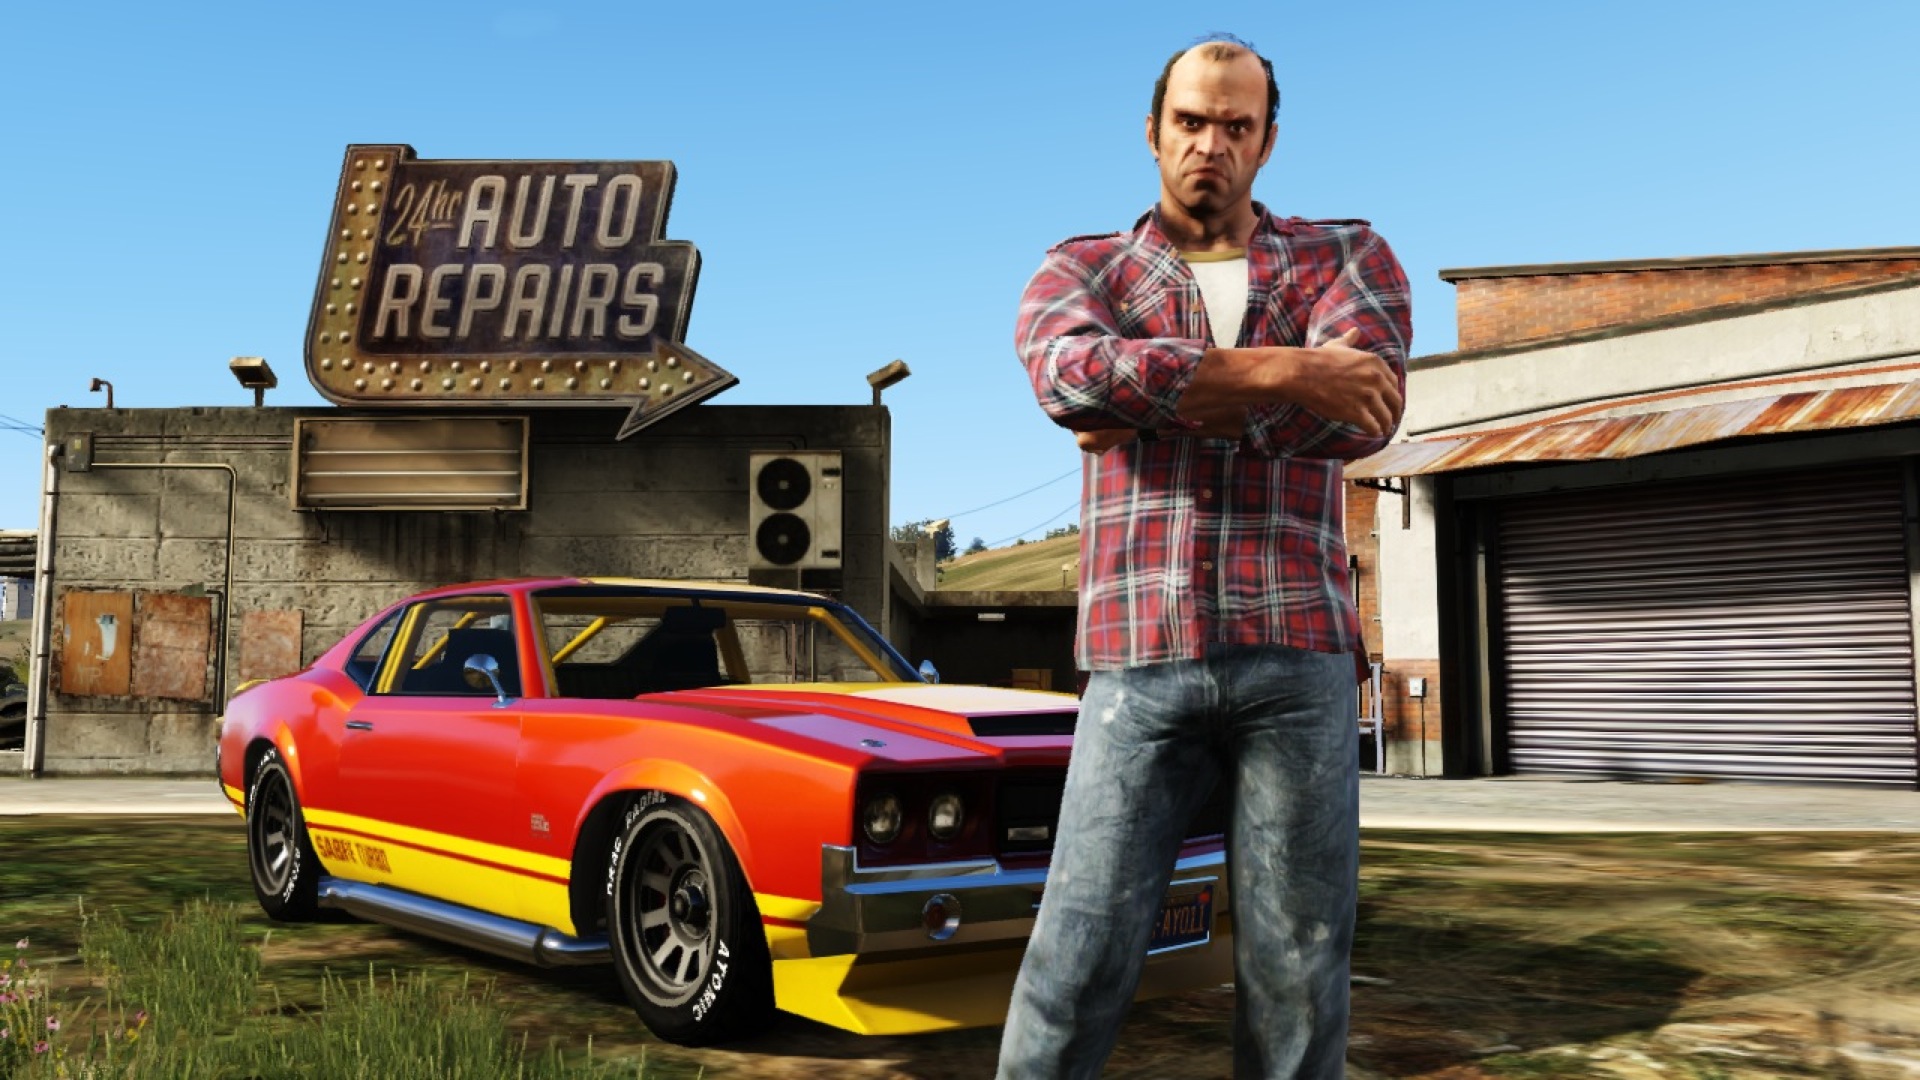 The GTA Place - New GTAV Articles and Screenshots from GameInformer